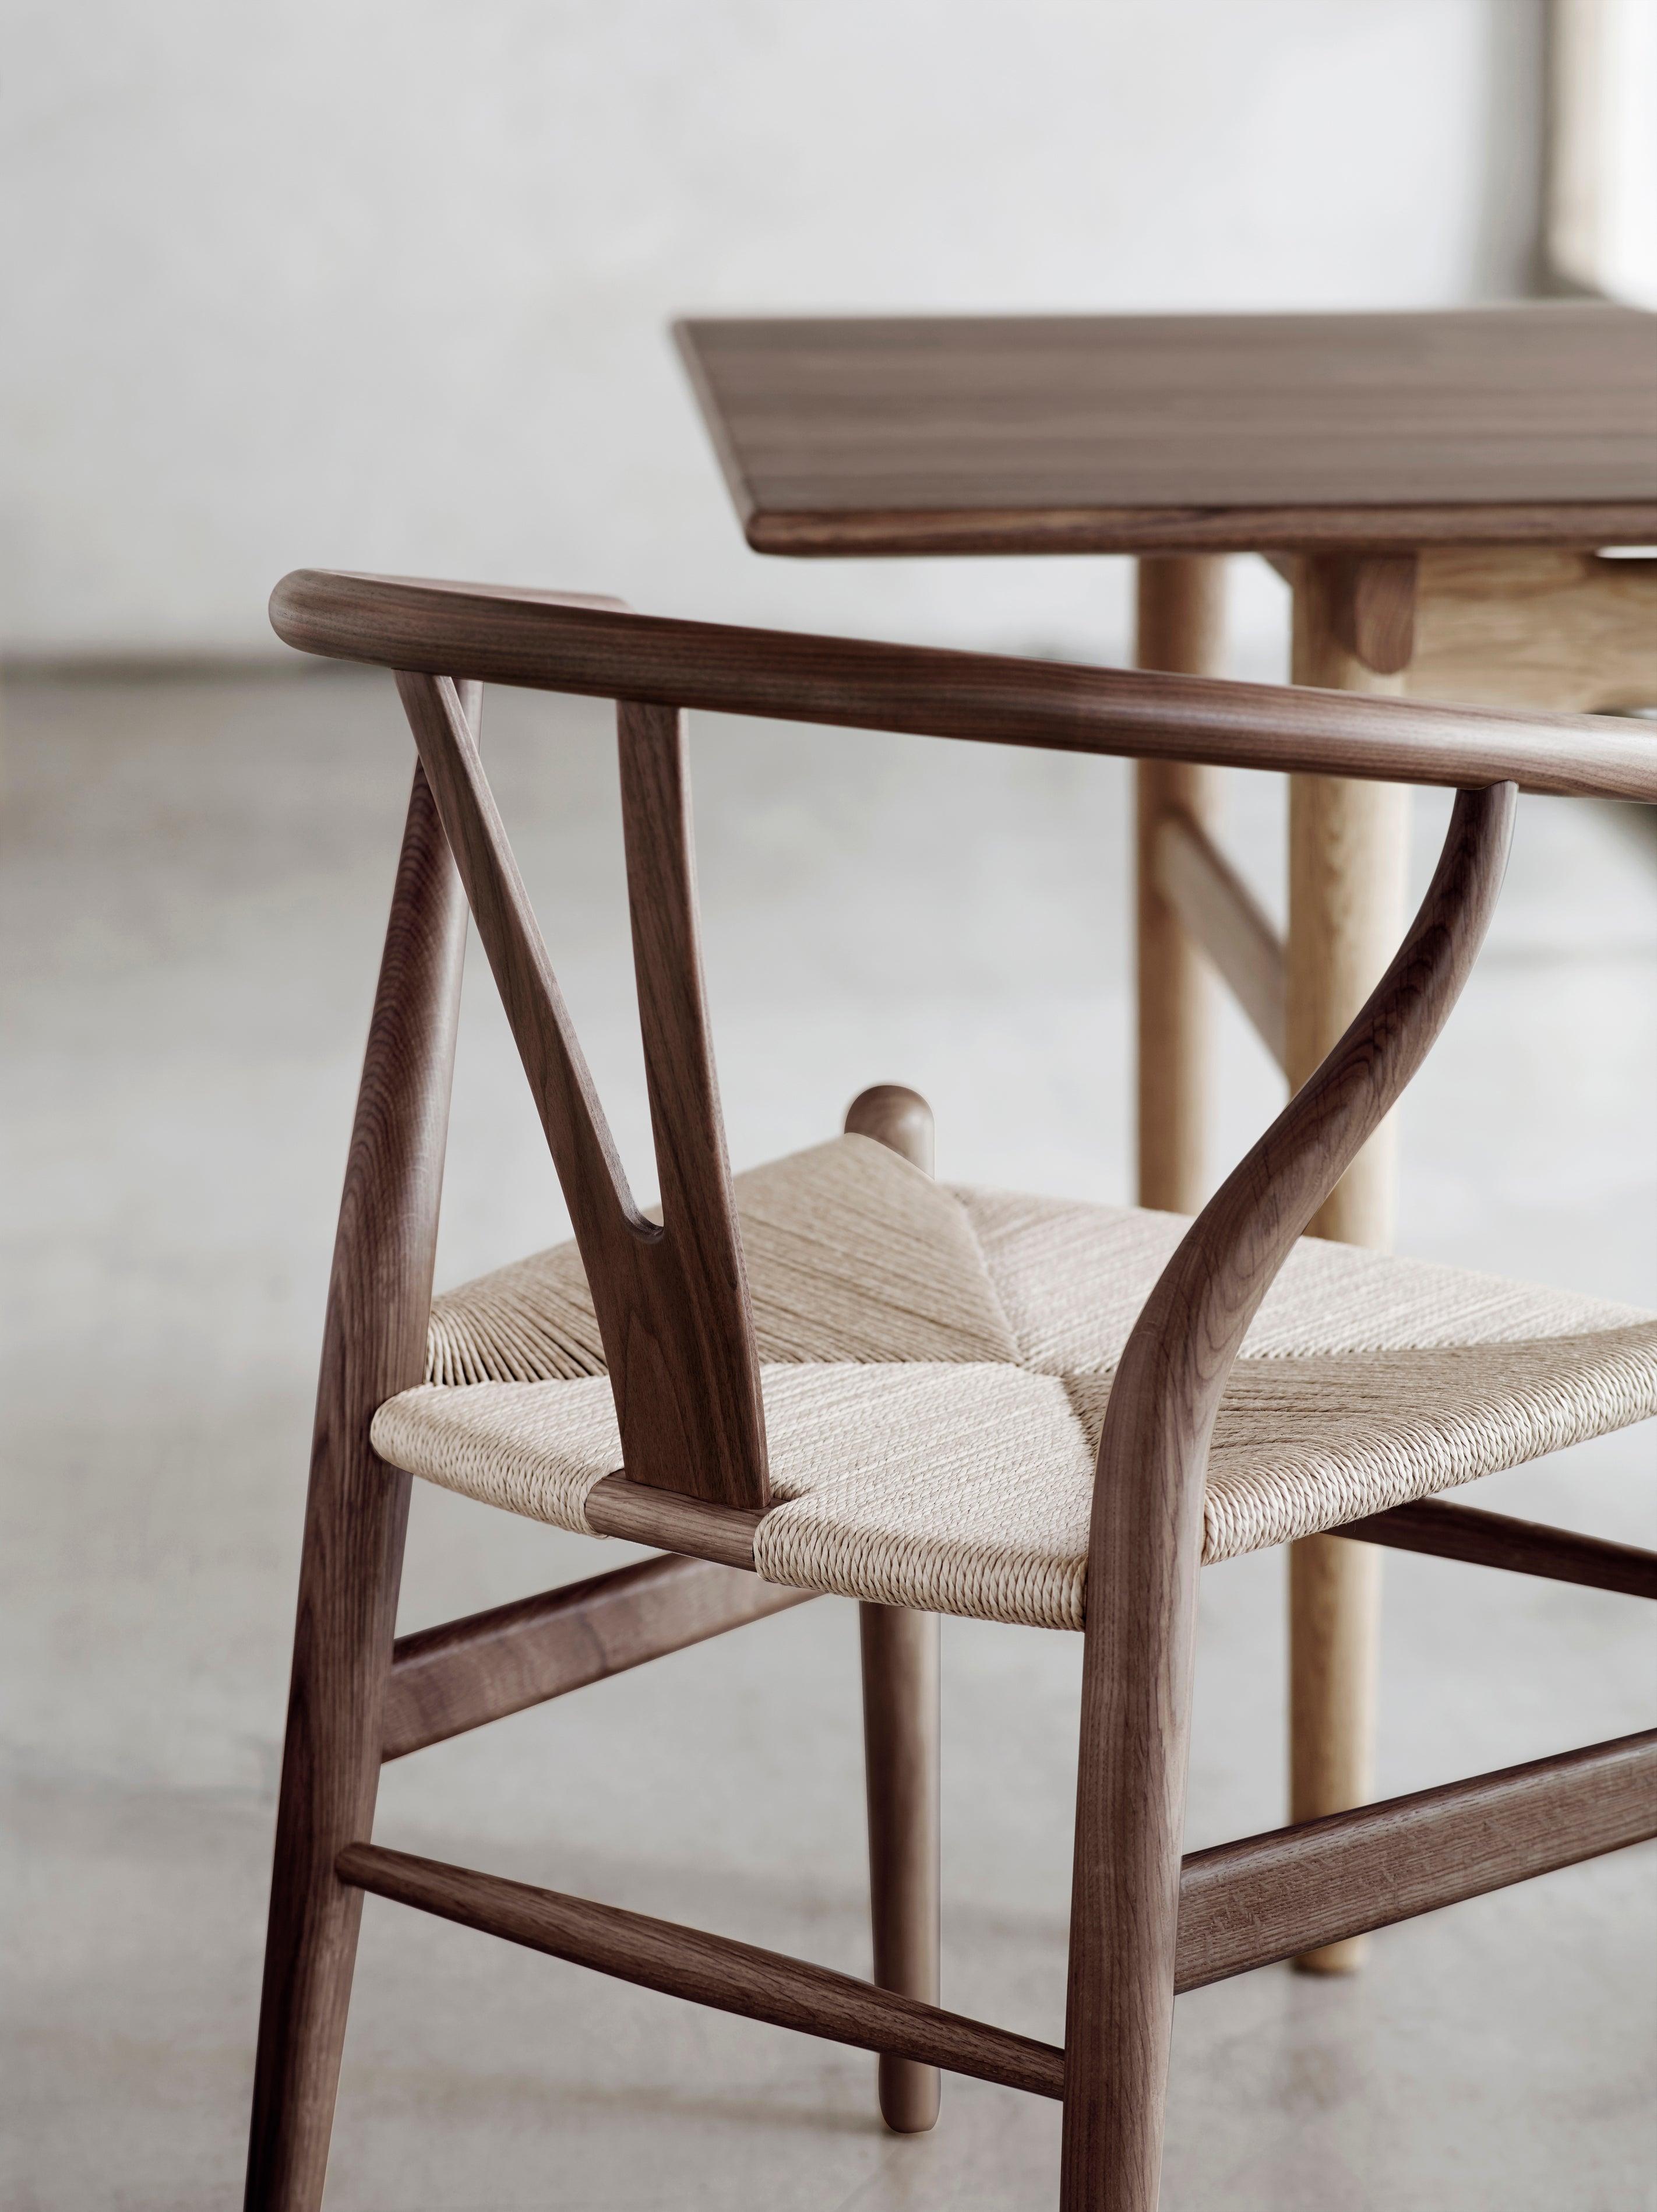 With a form that is uniquely its own, the iconic CH24 Wishbone chair by Hans J. Wegner holds a special place in the world of modern design. When designing the CH24, Wegner chose to combine the back and armrest into a single piece. To give stability